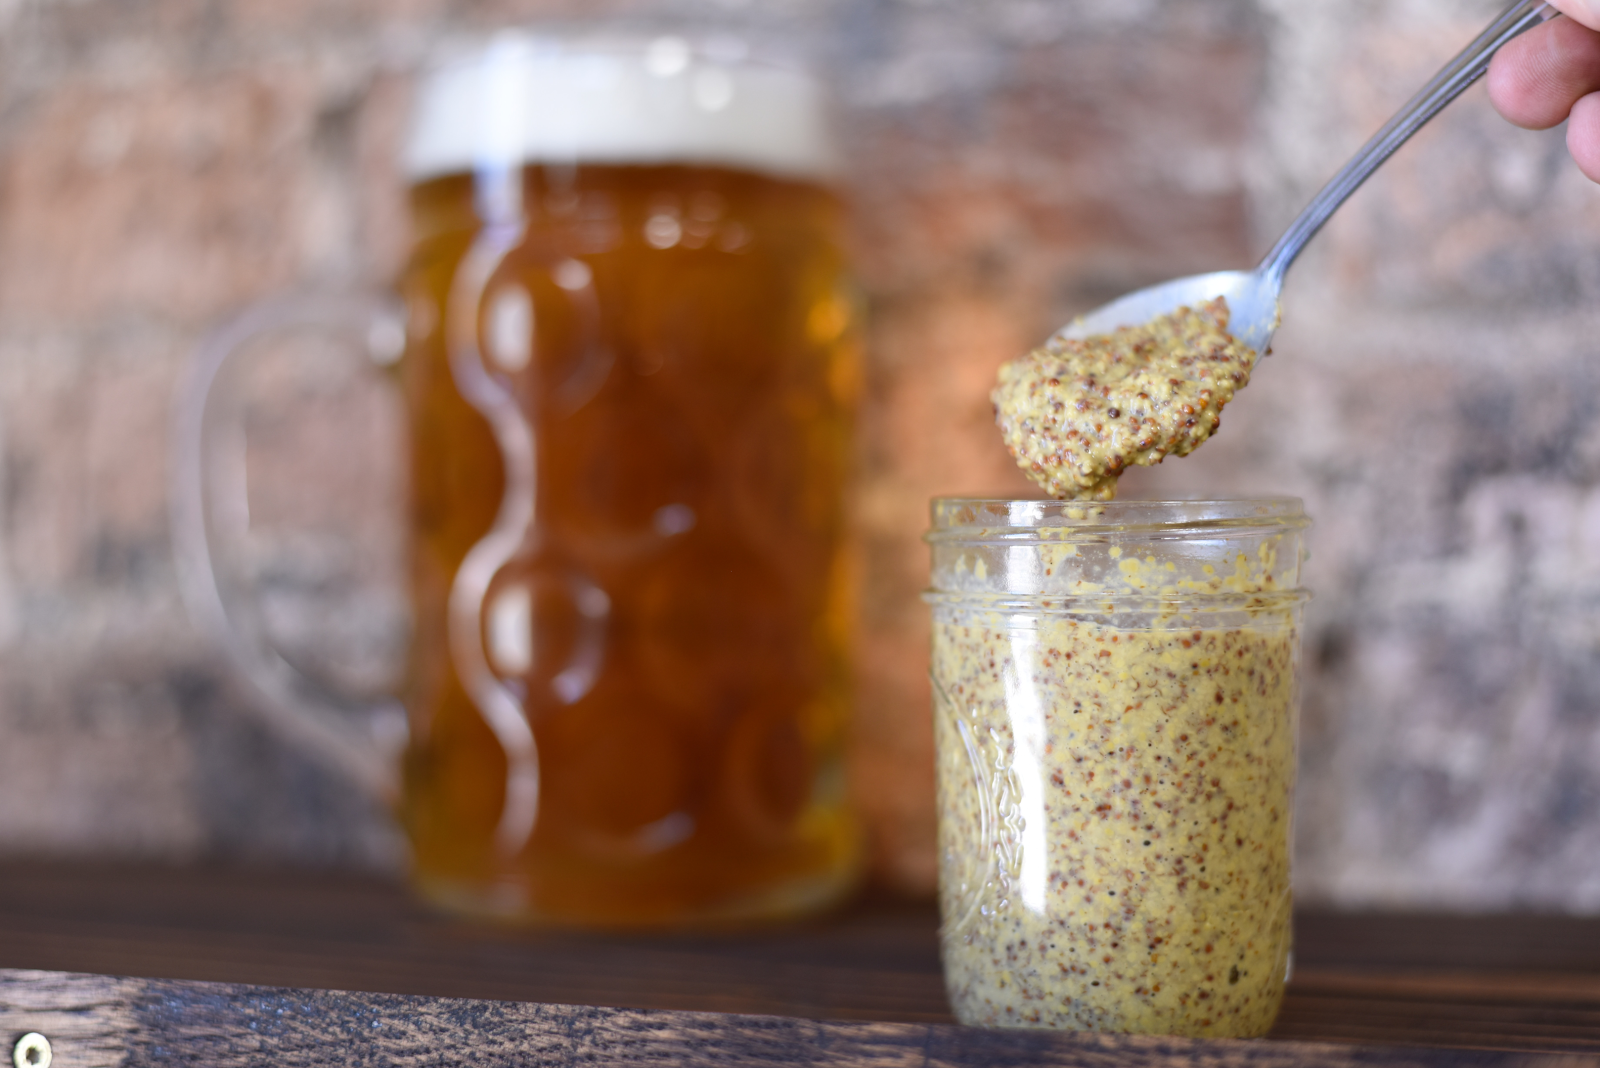 stone ground mustard being spooned out of a jar